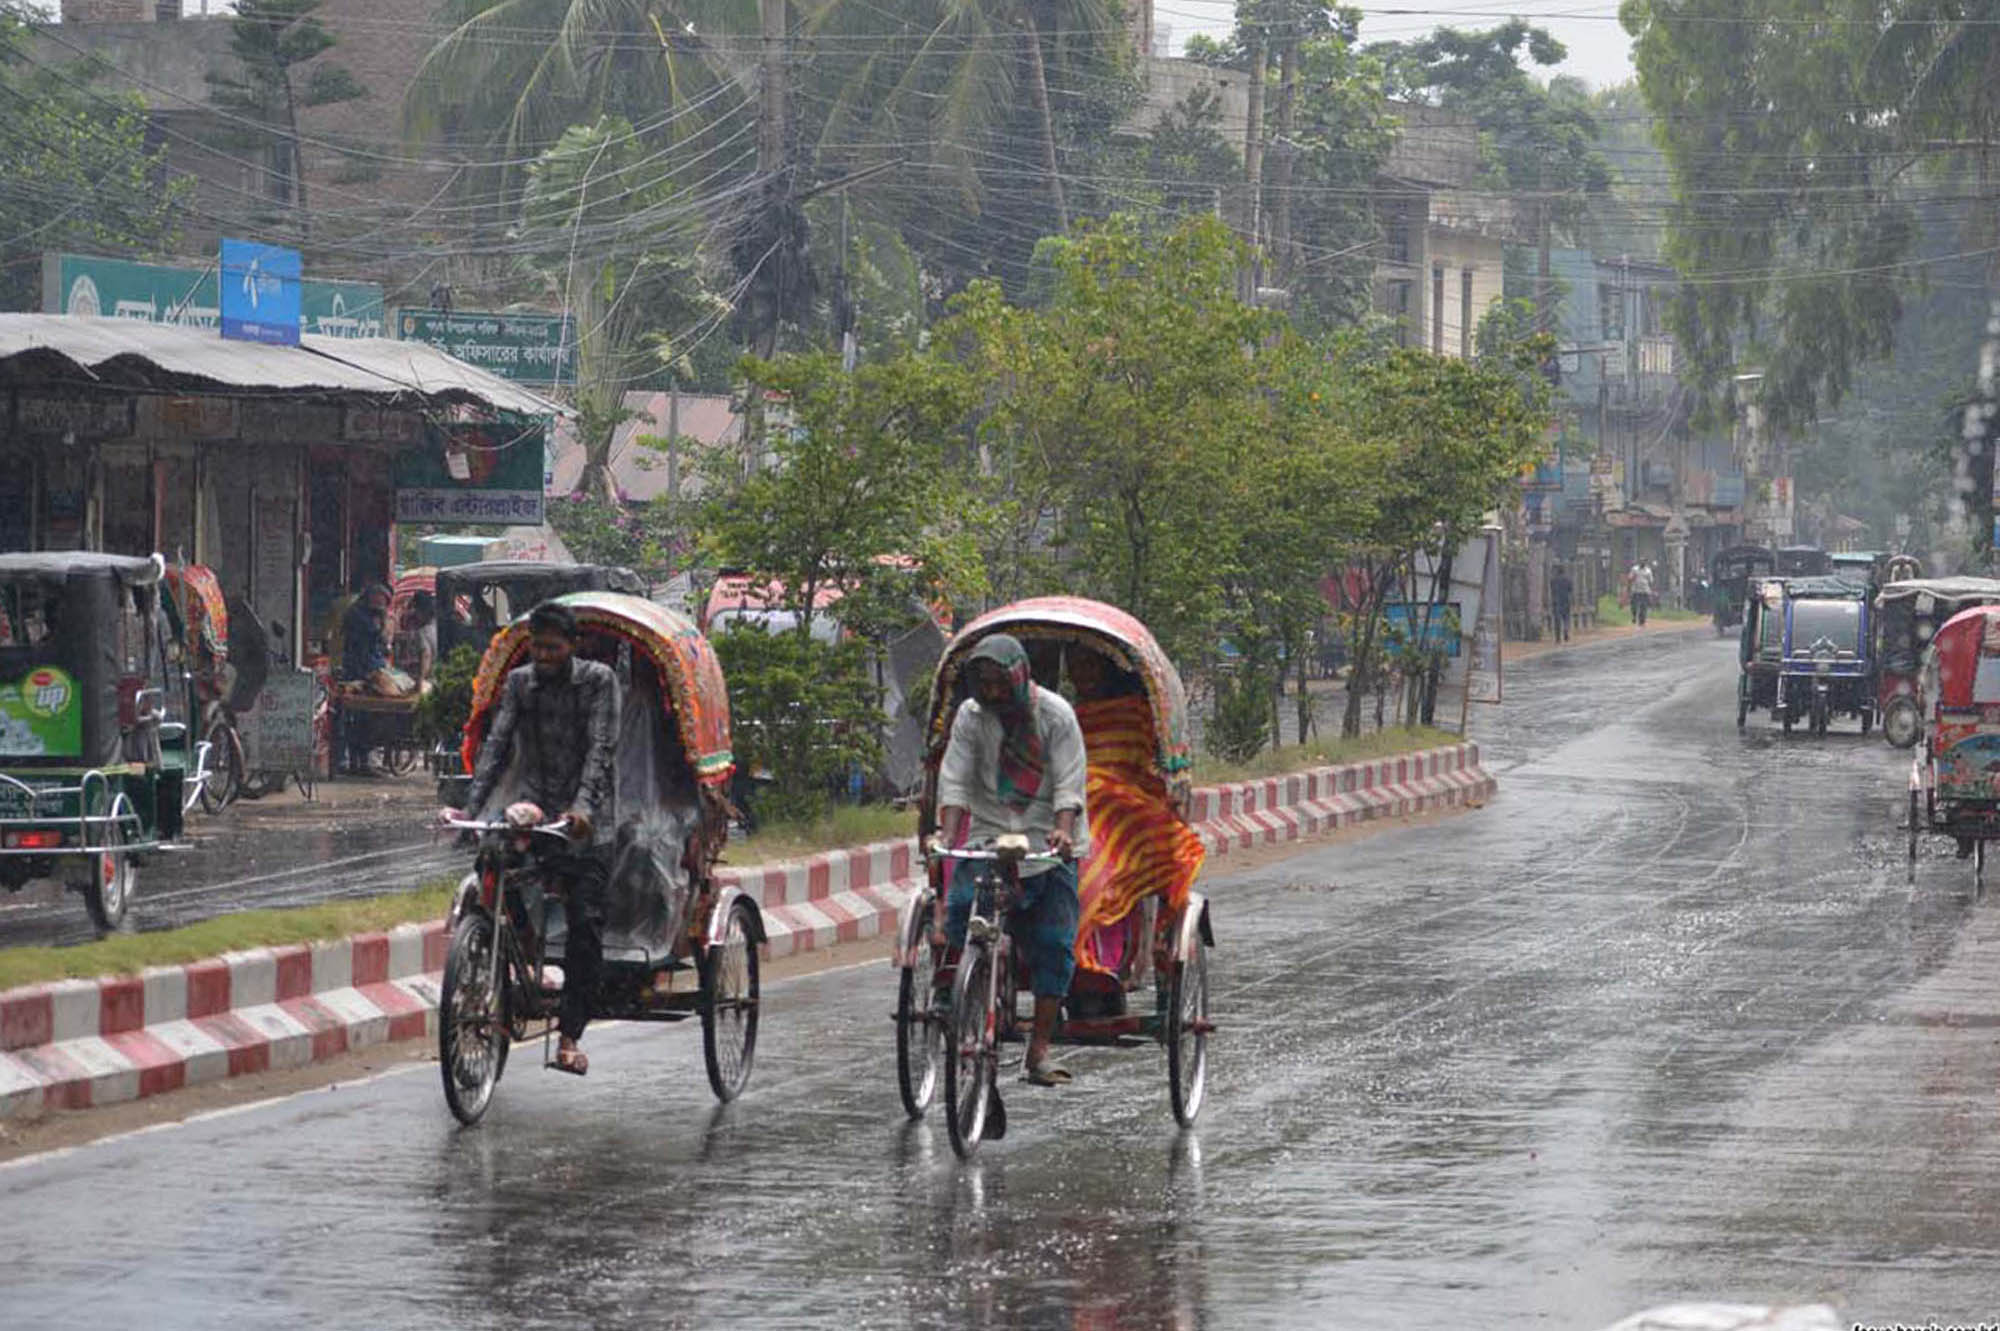 Rain or thundershowers likely in parts of country: Met office